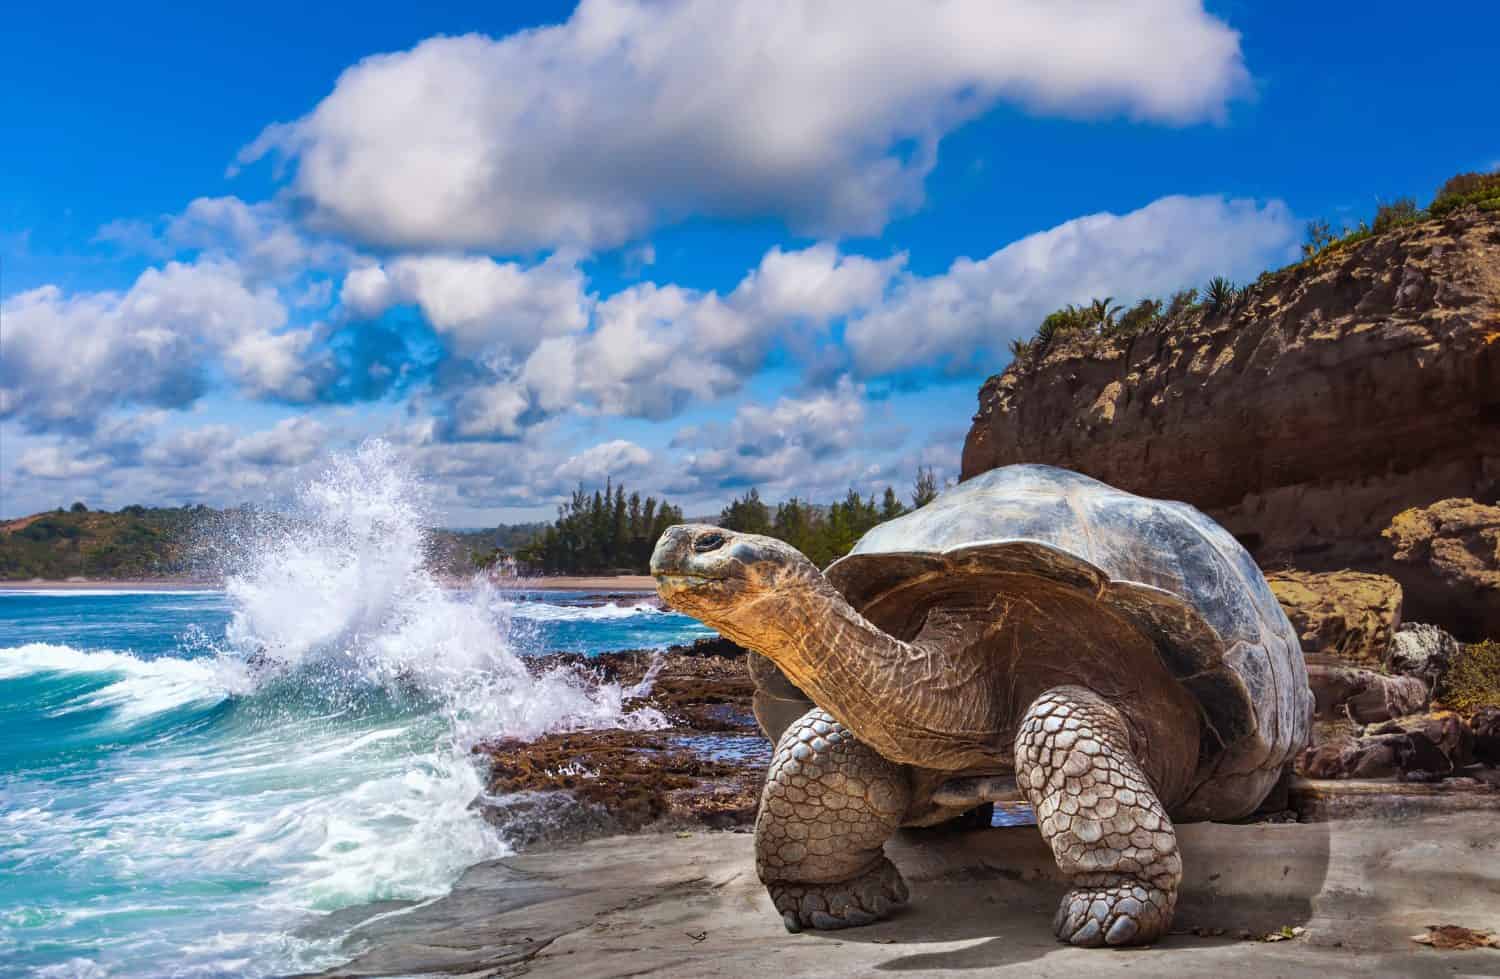 <ul> <li><strong>Location:</strong> Republic of Ecuador</li> <li><strong>Known For:</strong> Giant tortoises and a link to famed scientist Charles Darwin</li> </ul> <p>The Galapagos Islands in Ecuador of South America are in jeopardy of disappearing; some predict this could happen by 2100. However, climate change, the influx of tourists, and volcanic activity leave the Galapagos Islands vulnerable. In 10 years, the Islands will be significantly impacted.</p>